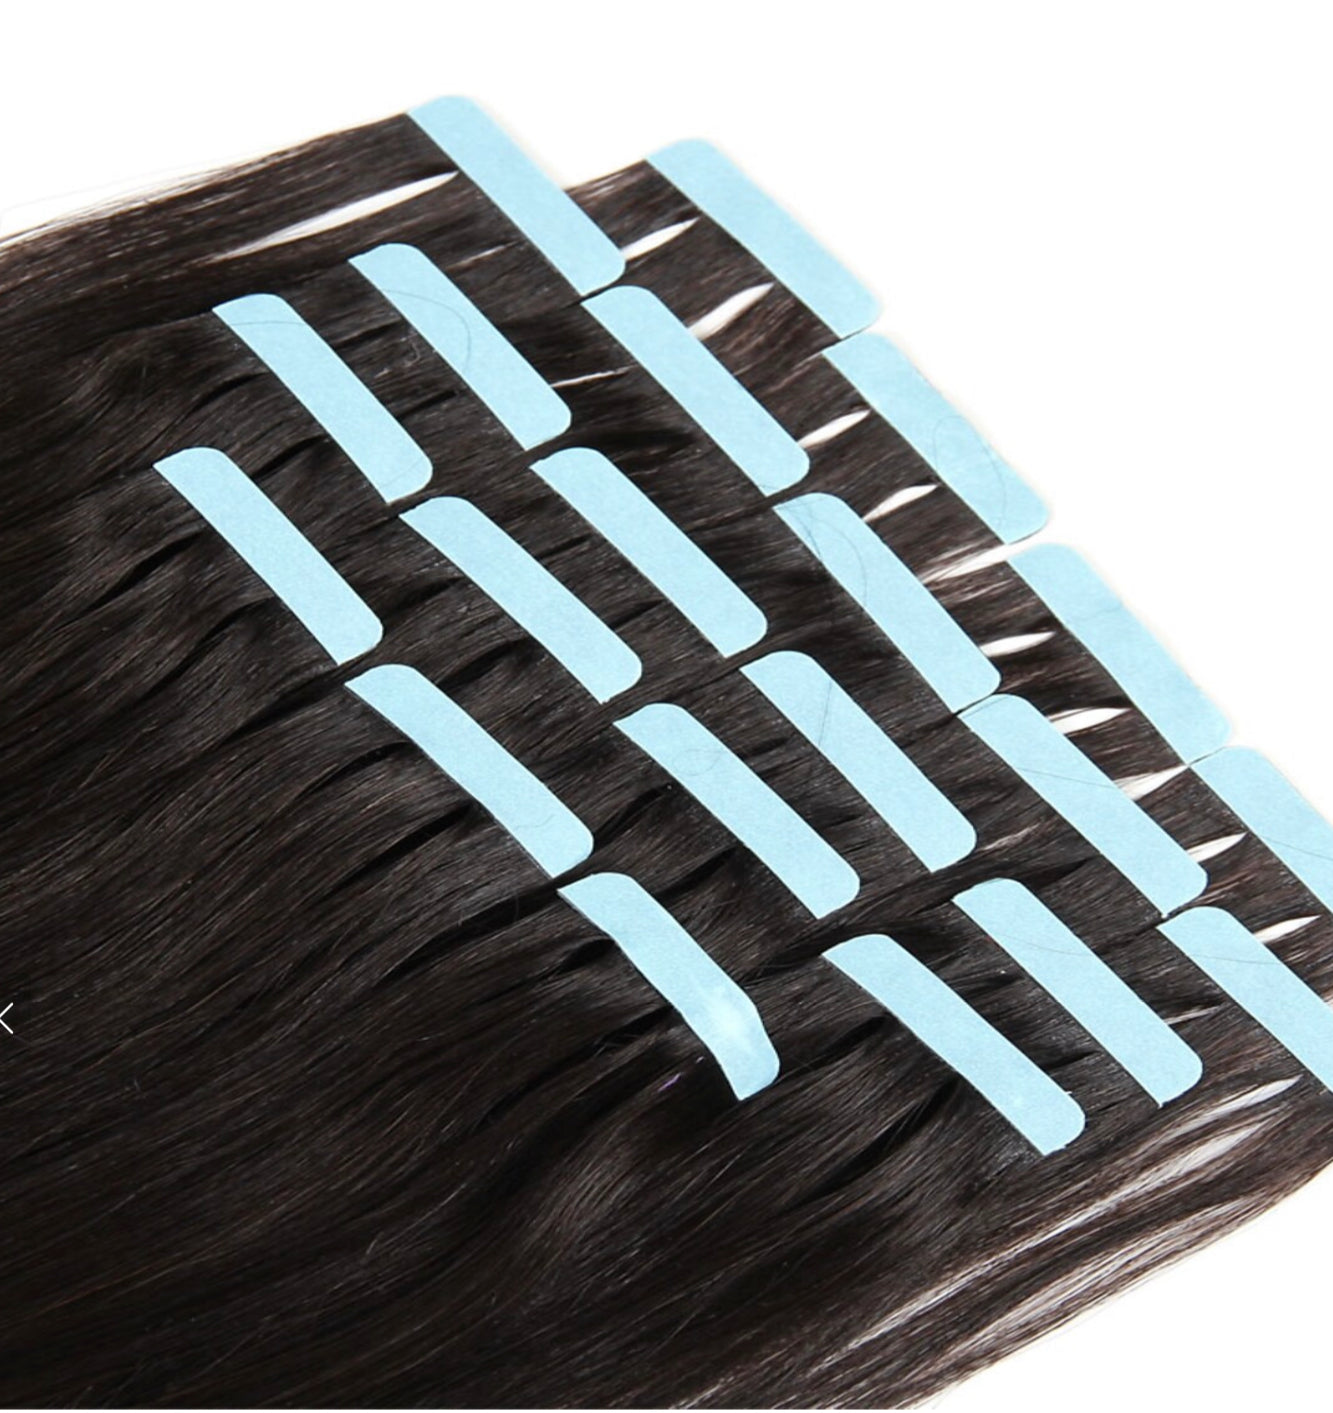 LAID. Brazilian Hair Tape-In’s